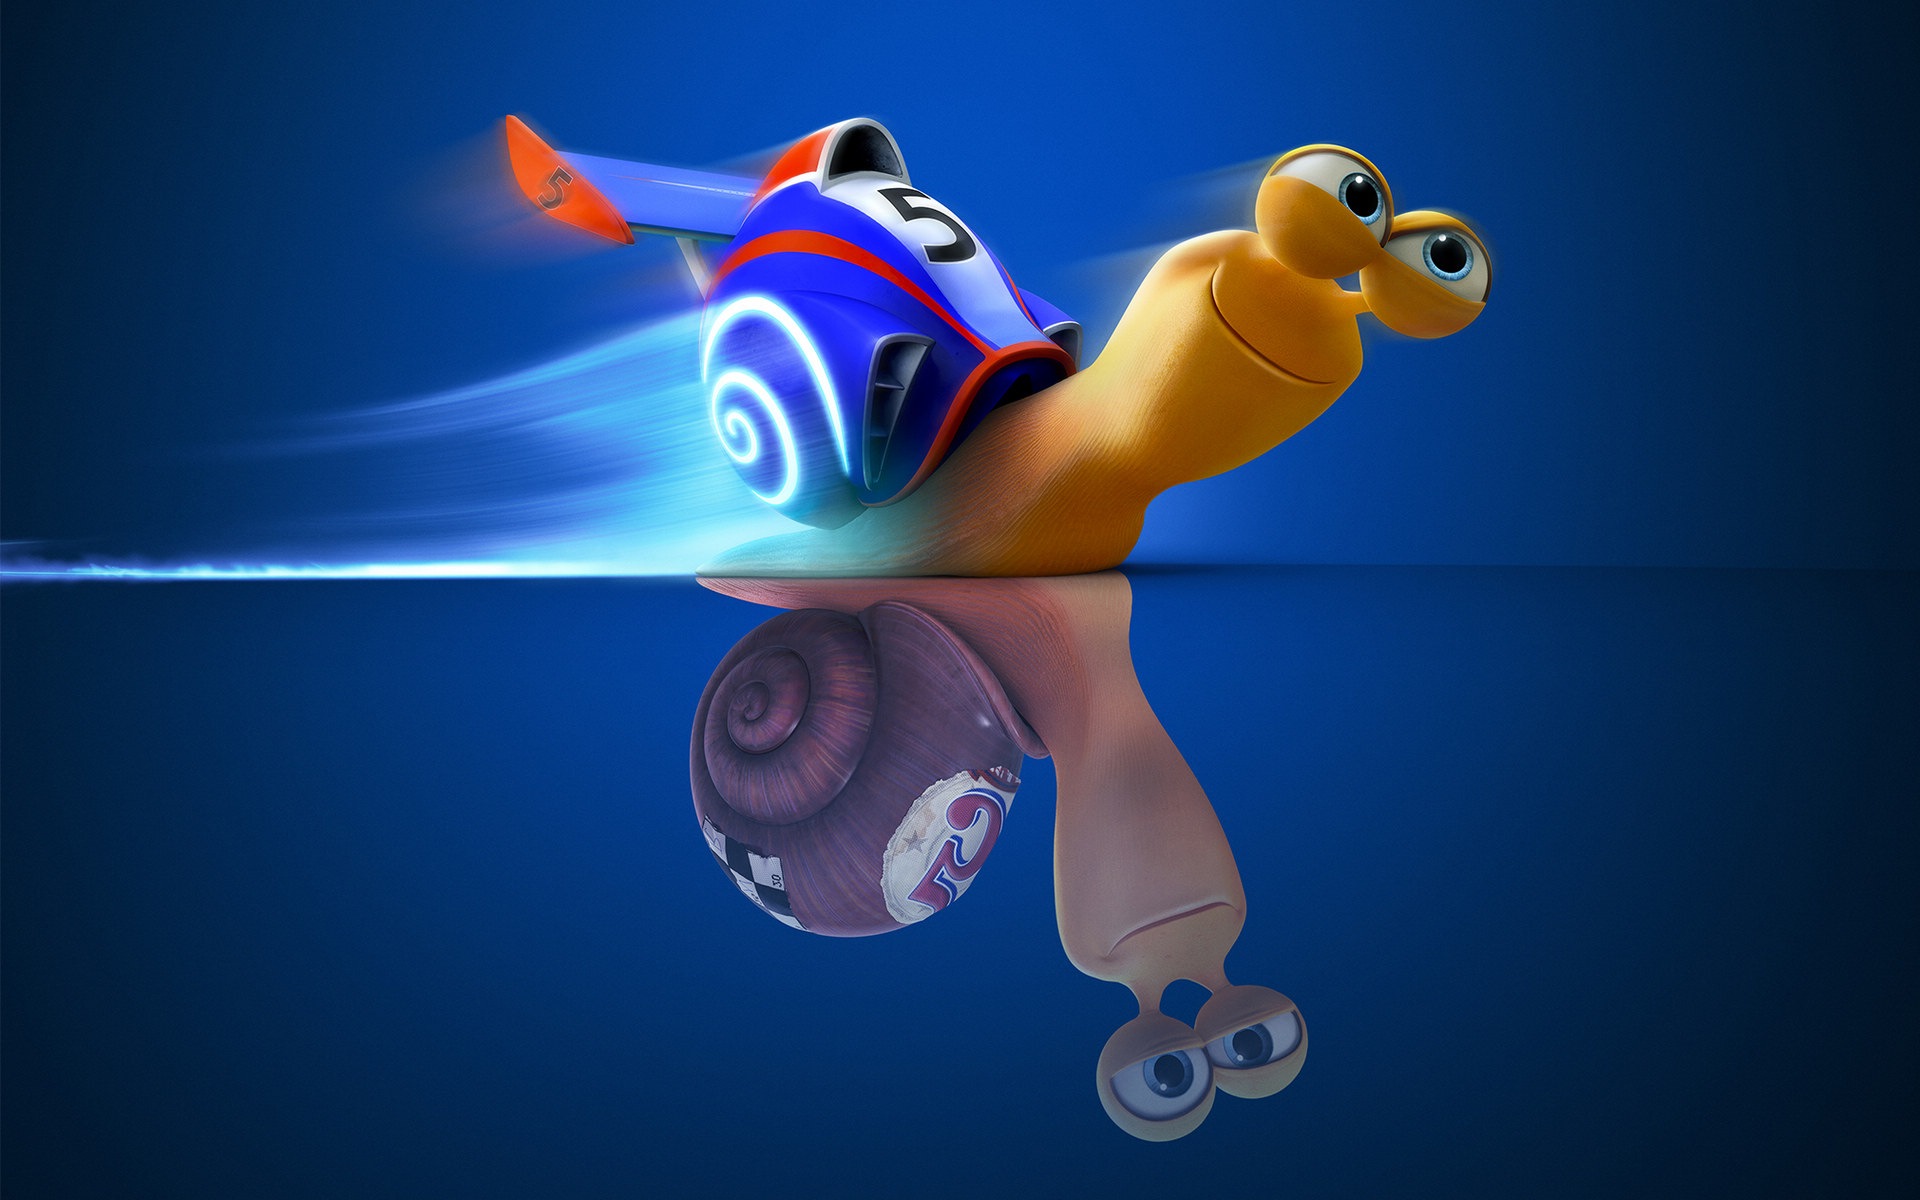 Turbo 3D movie HD wallpapers #4 - 1920x1200